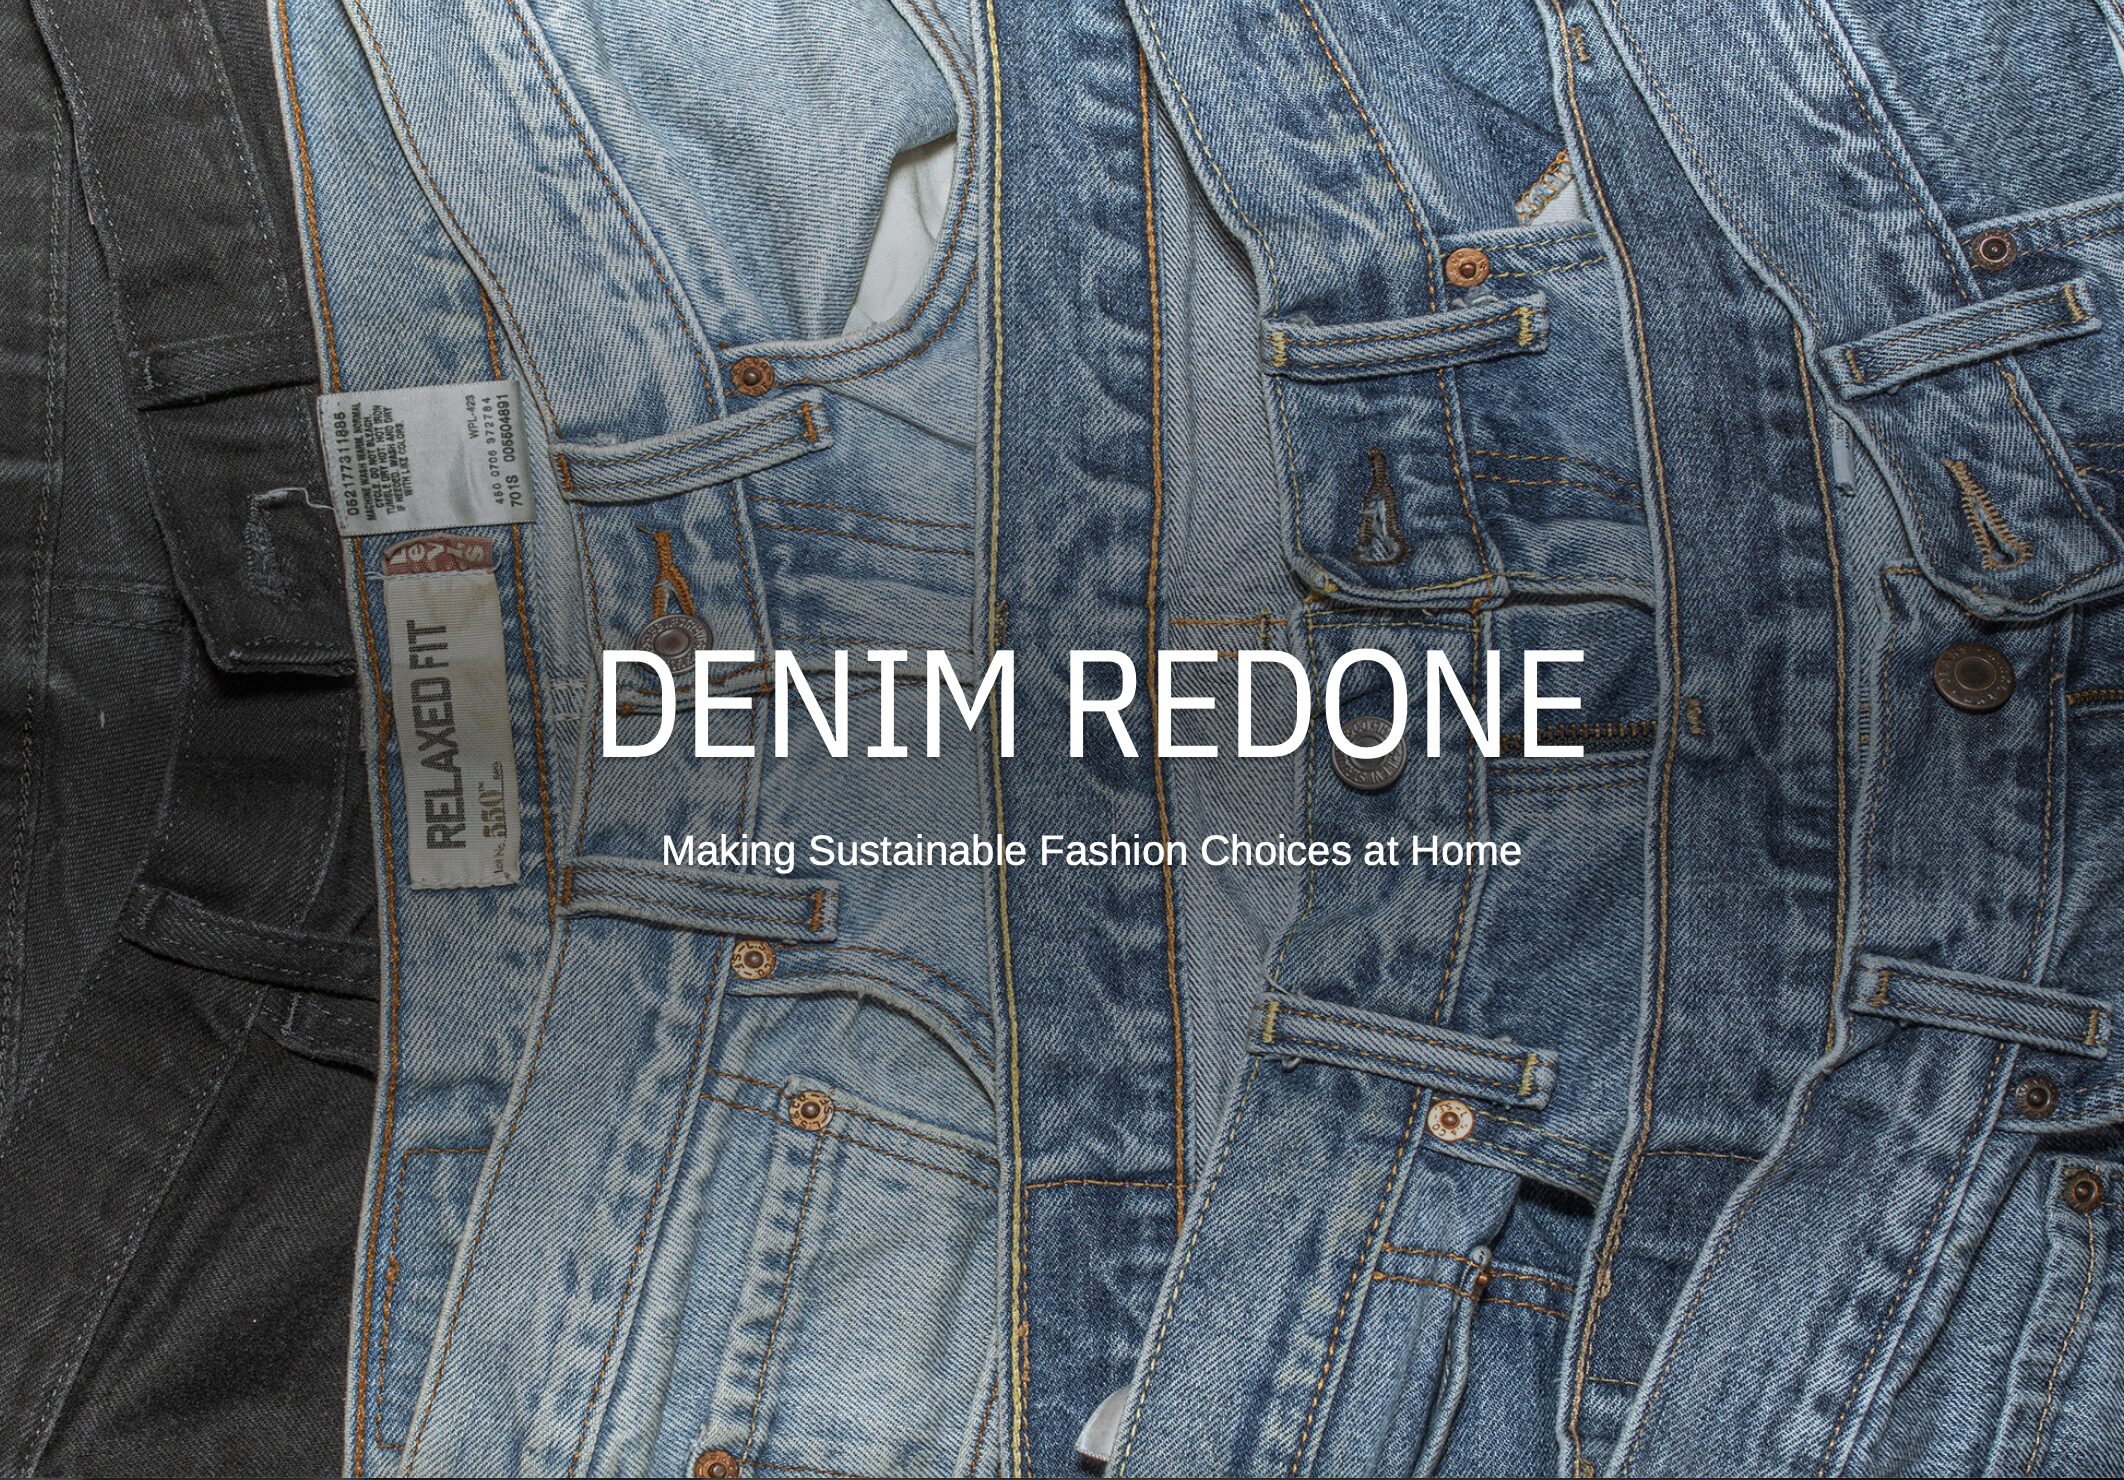 Layers of denim on the title slide for the presentation called, "Denim Redone."